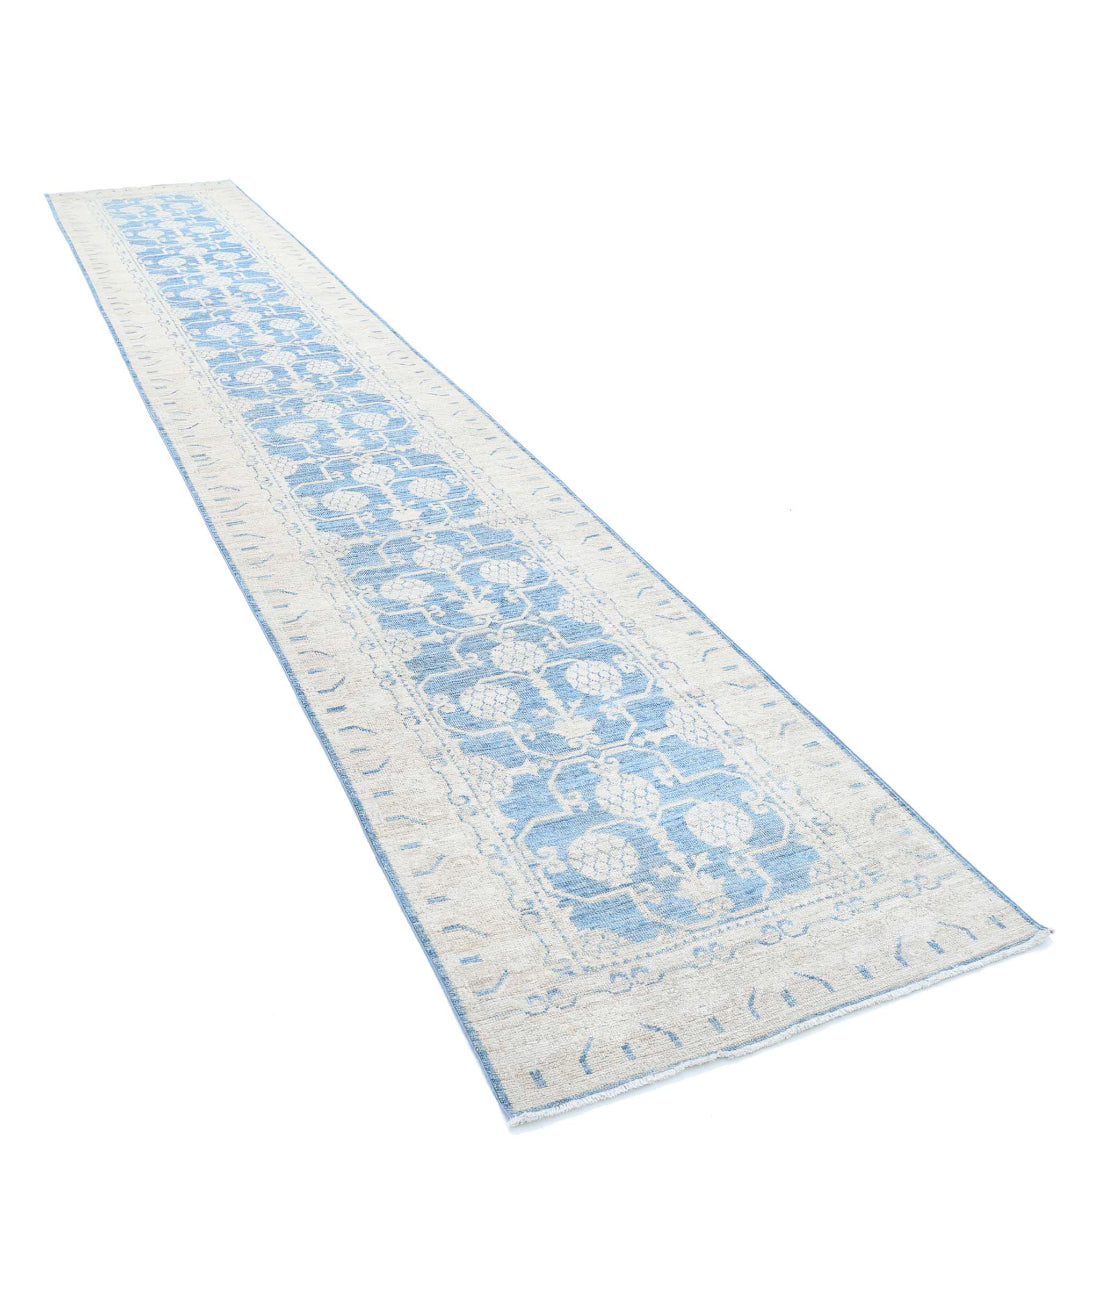 Serenity 3'0'' X 17'4'' Hand-Knotted Wool Rug 3'0'' x 17'4'' (90 X 520) / Blue / Ivory